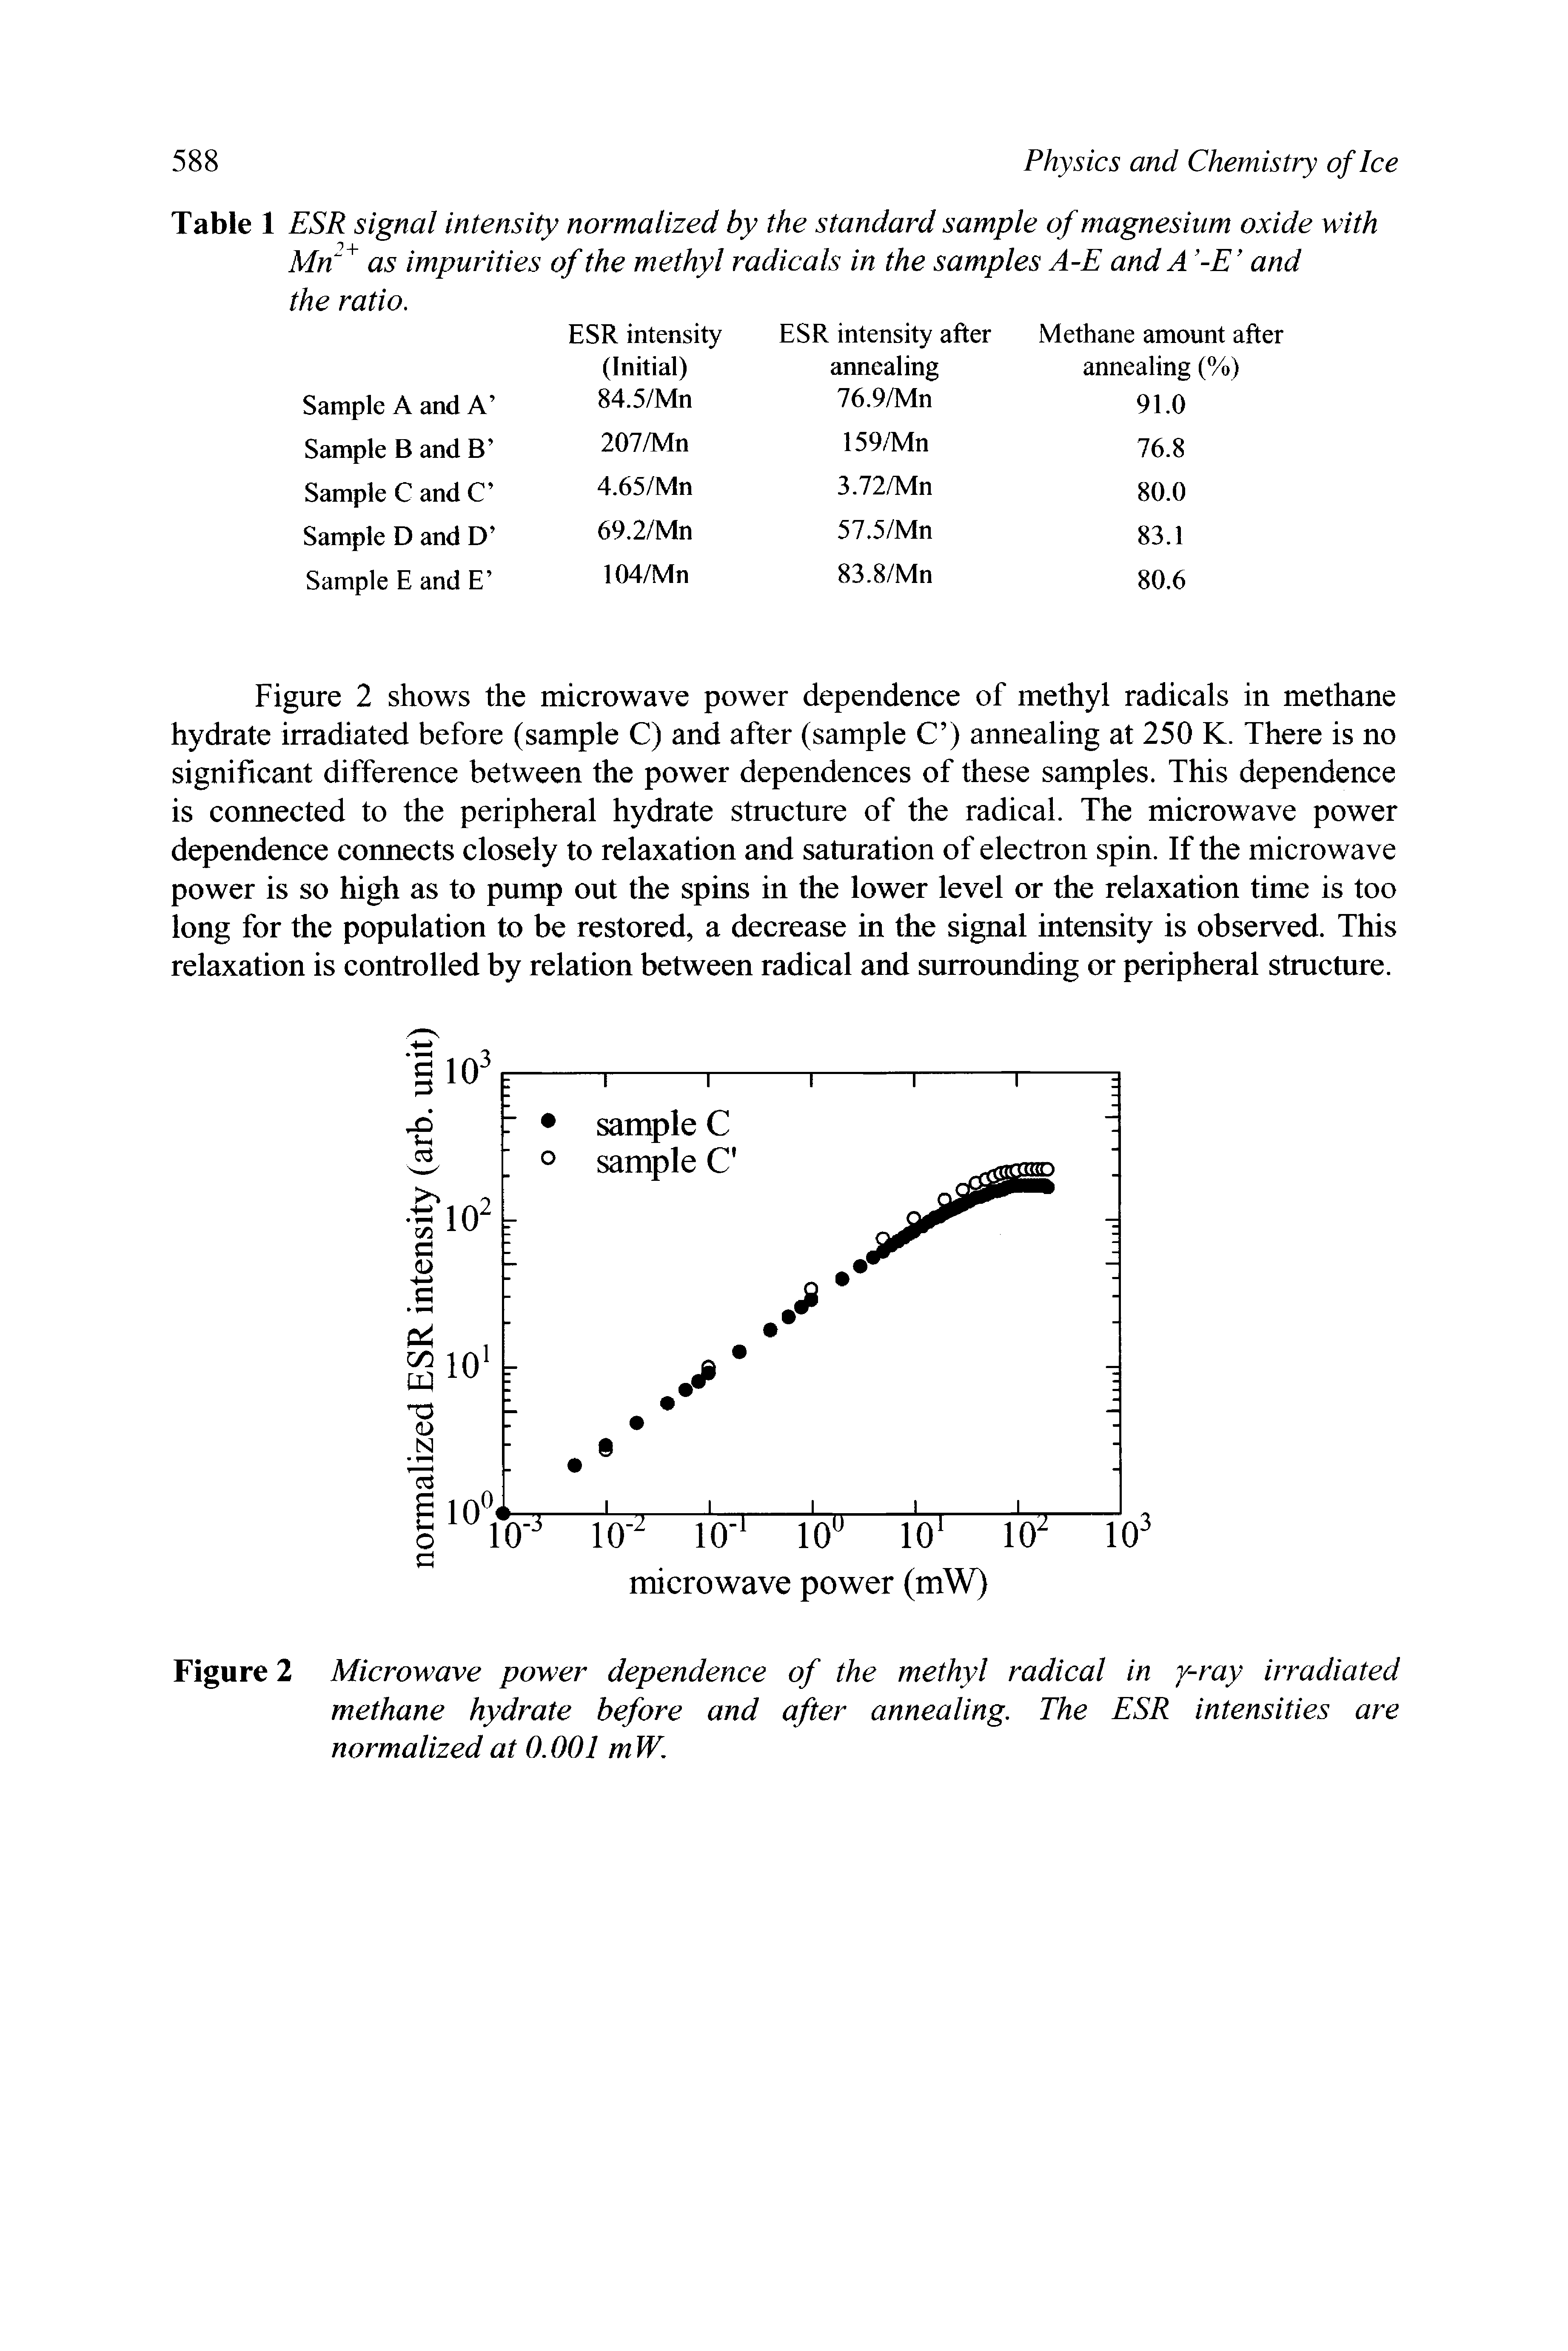 Table 1 ESR signal intensity normalized by the standard sample of magnesium oxide with Mn as impurities of the methyl radicals in the samples A-E and A -E and the ratio.